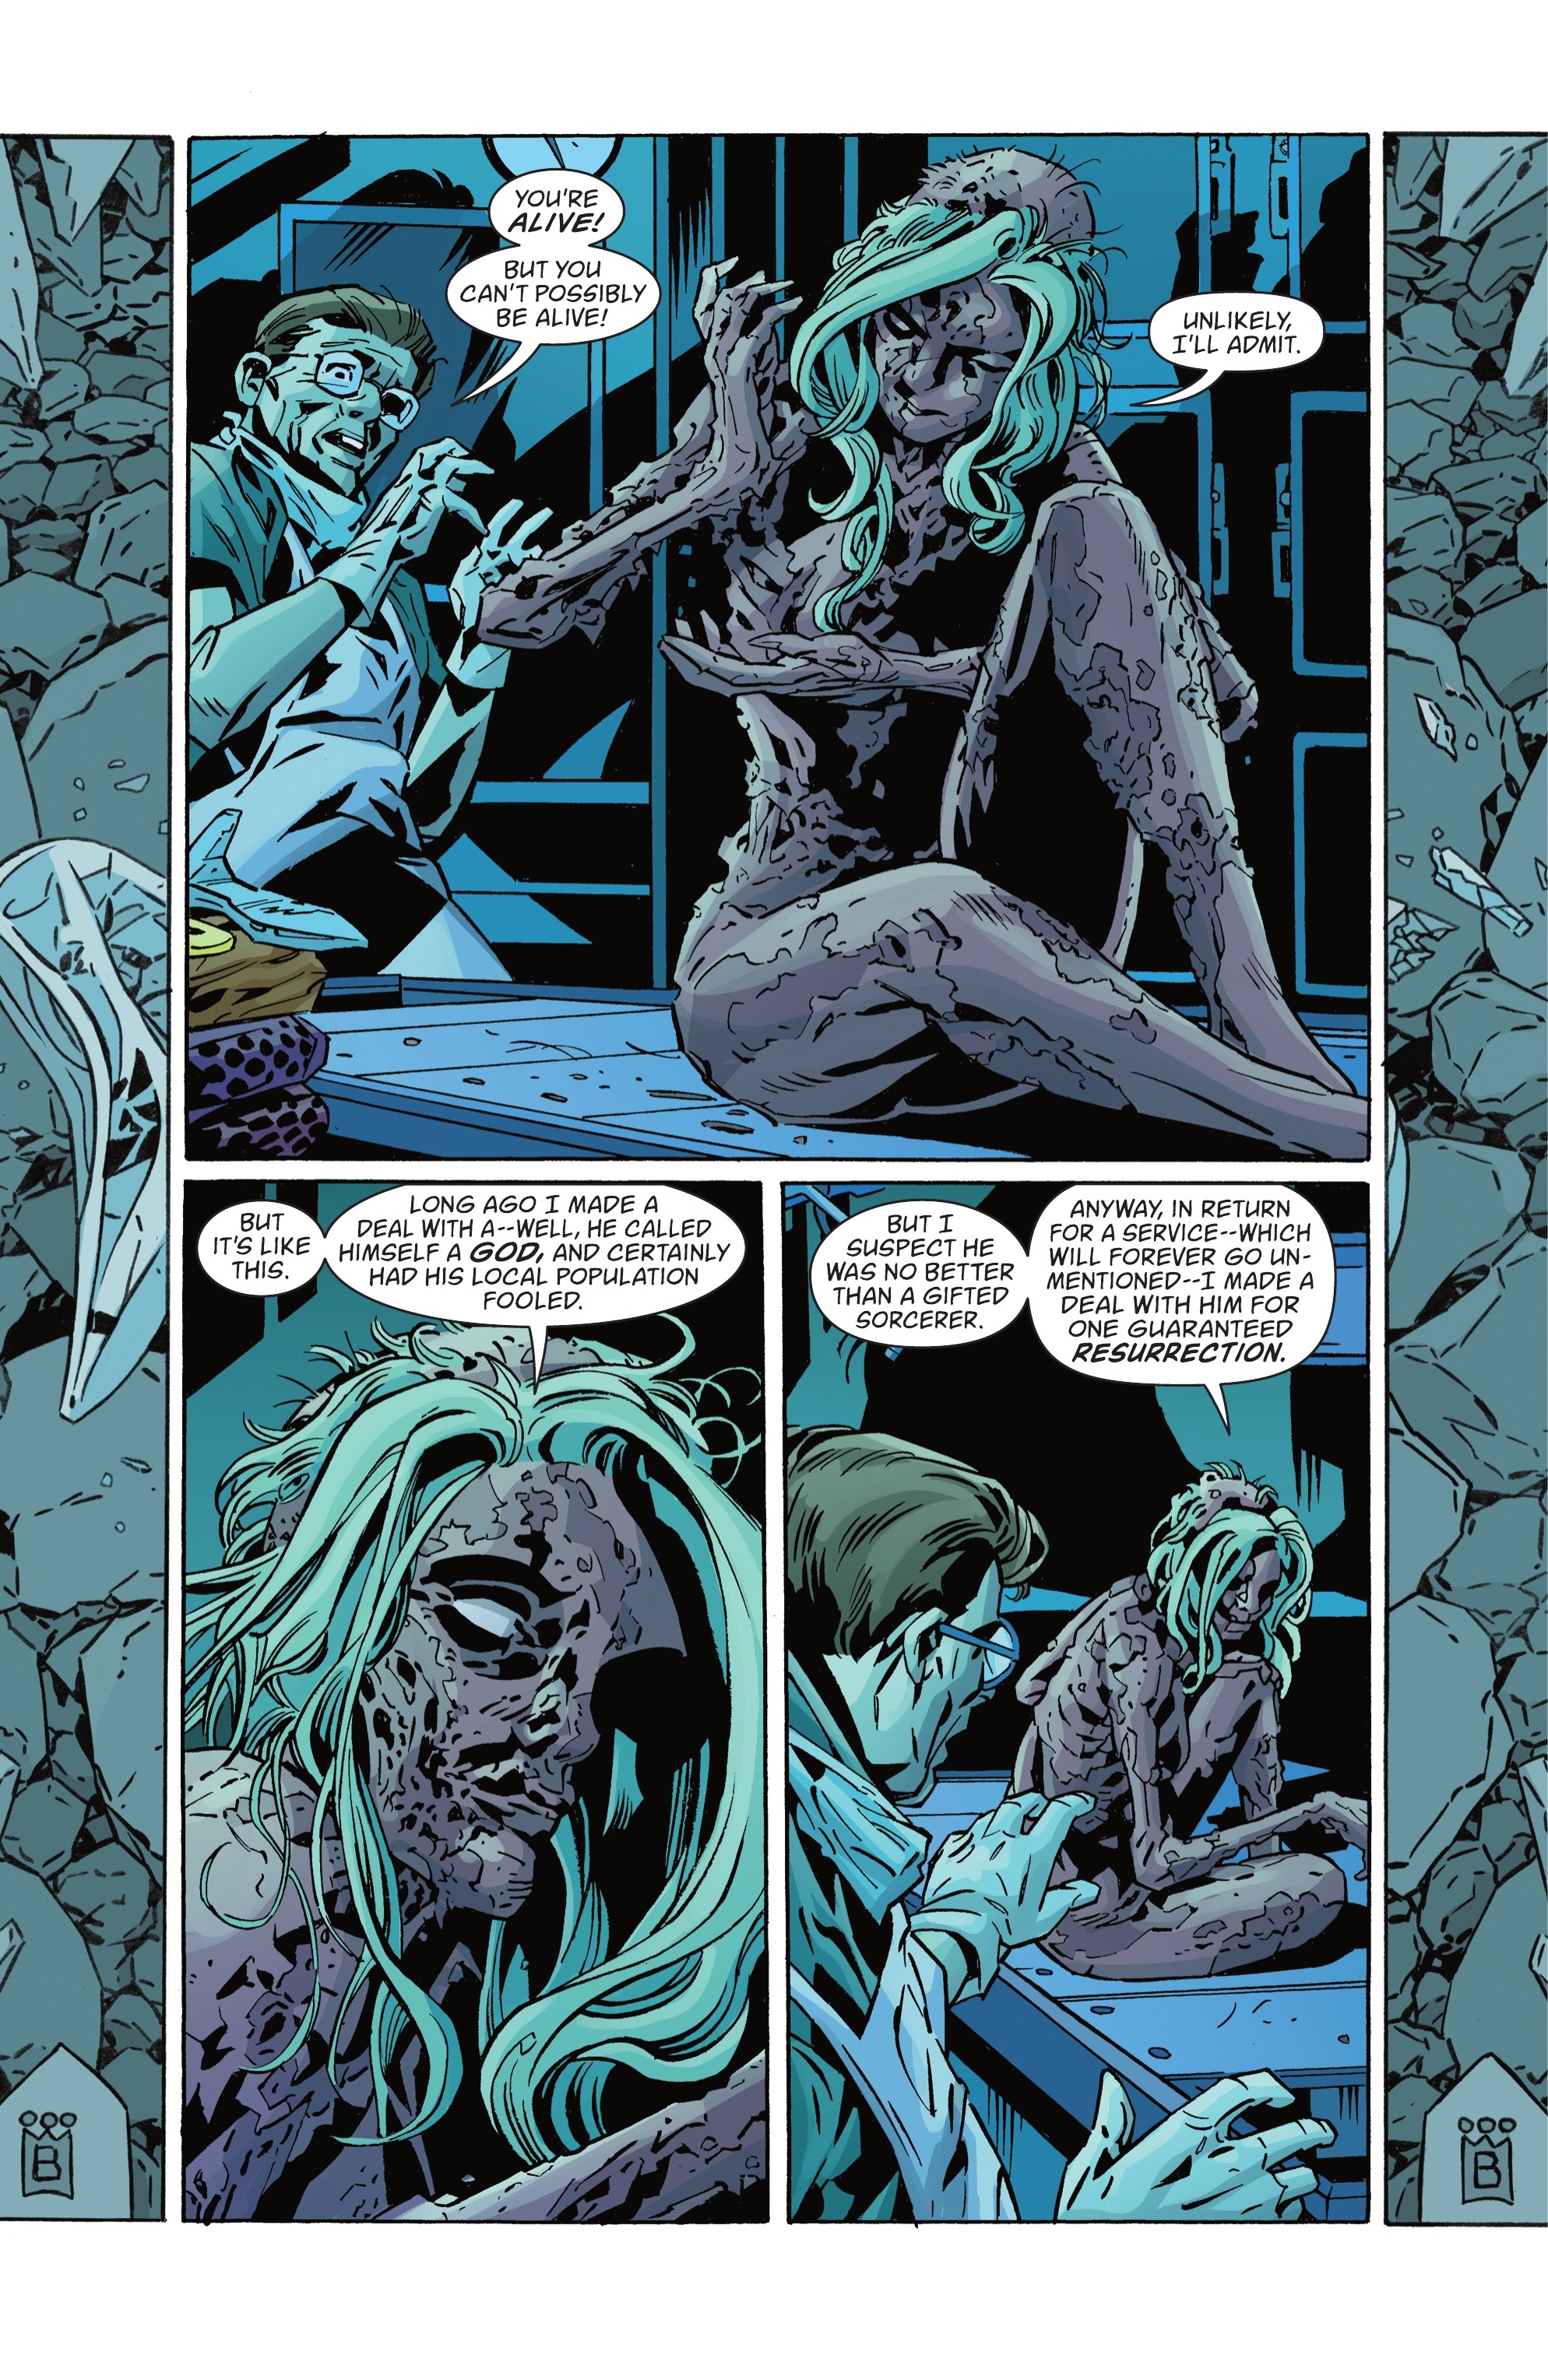 Fables (2002-): Chapter 152 - Page 4